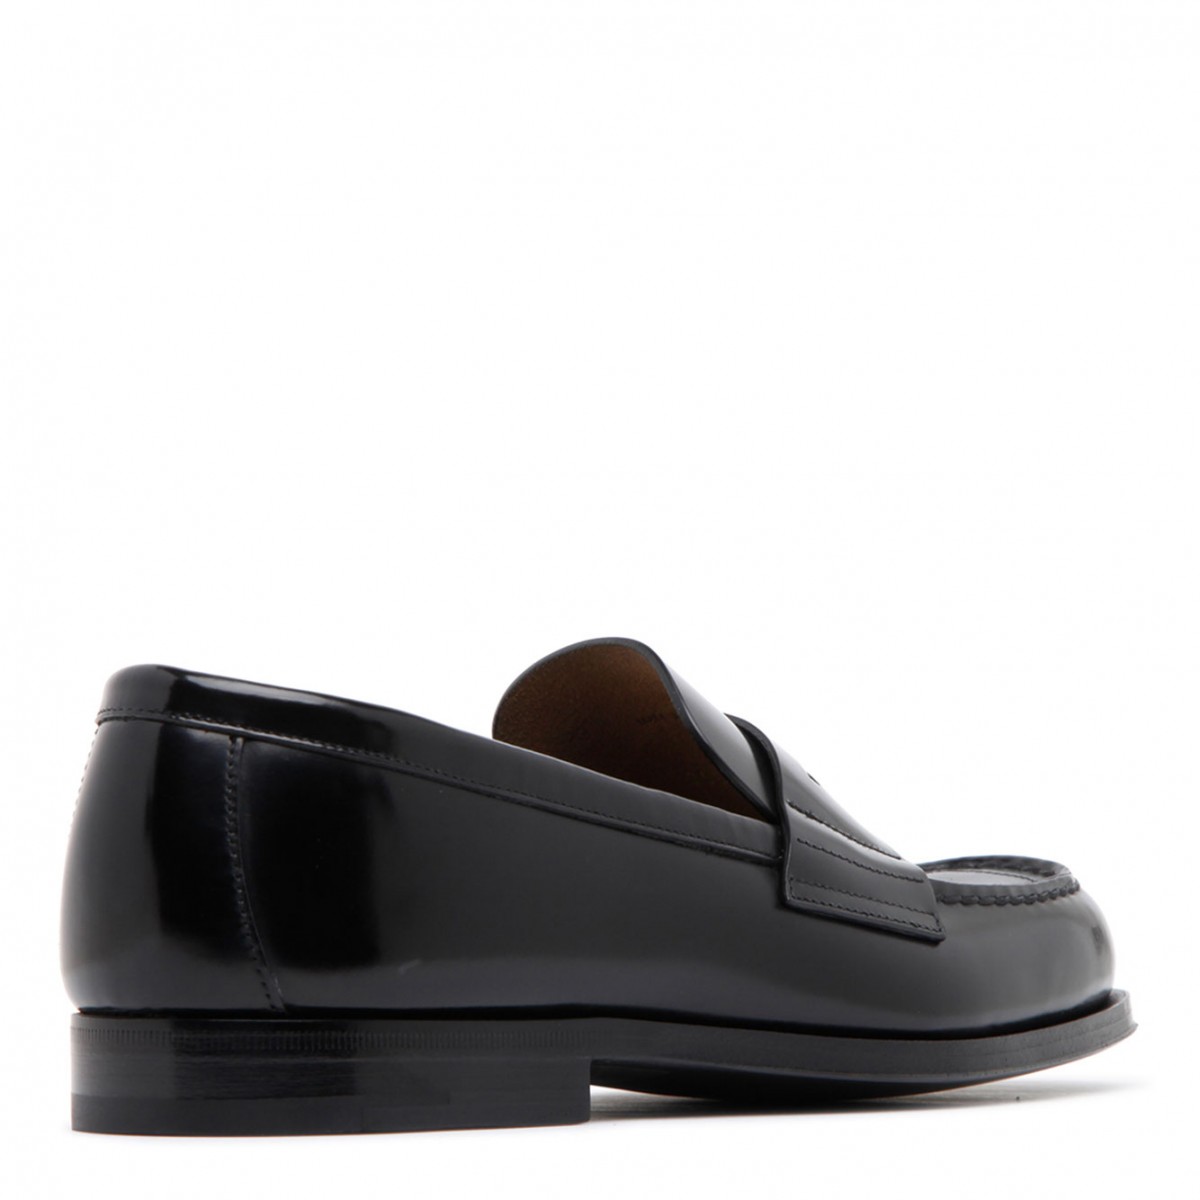 Prada Black Calf Leather Triangle Logo Penny Loafers.| COLOGNESE 1882